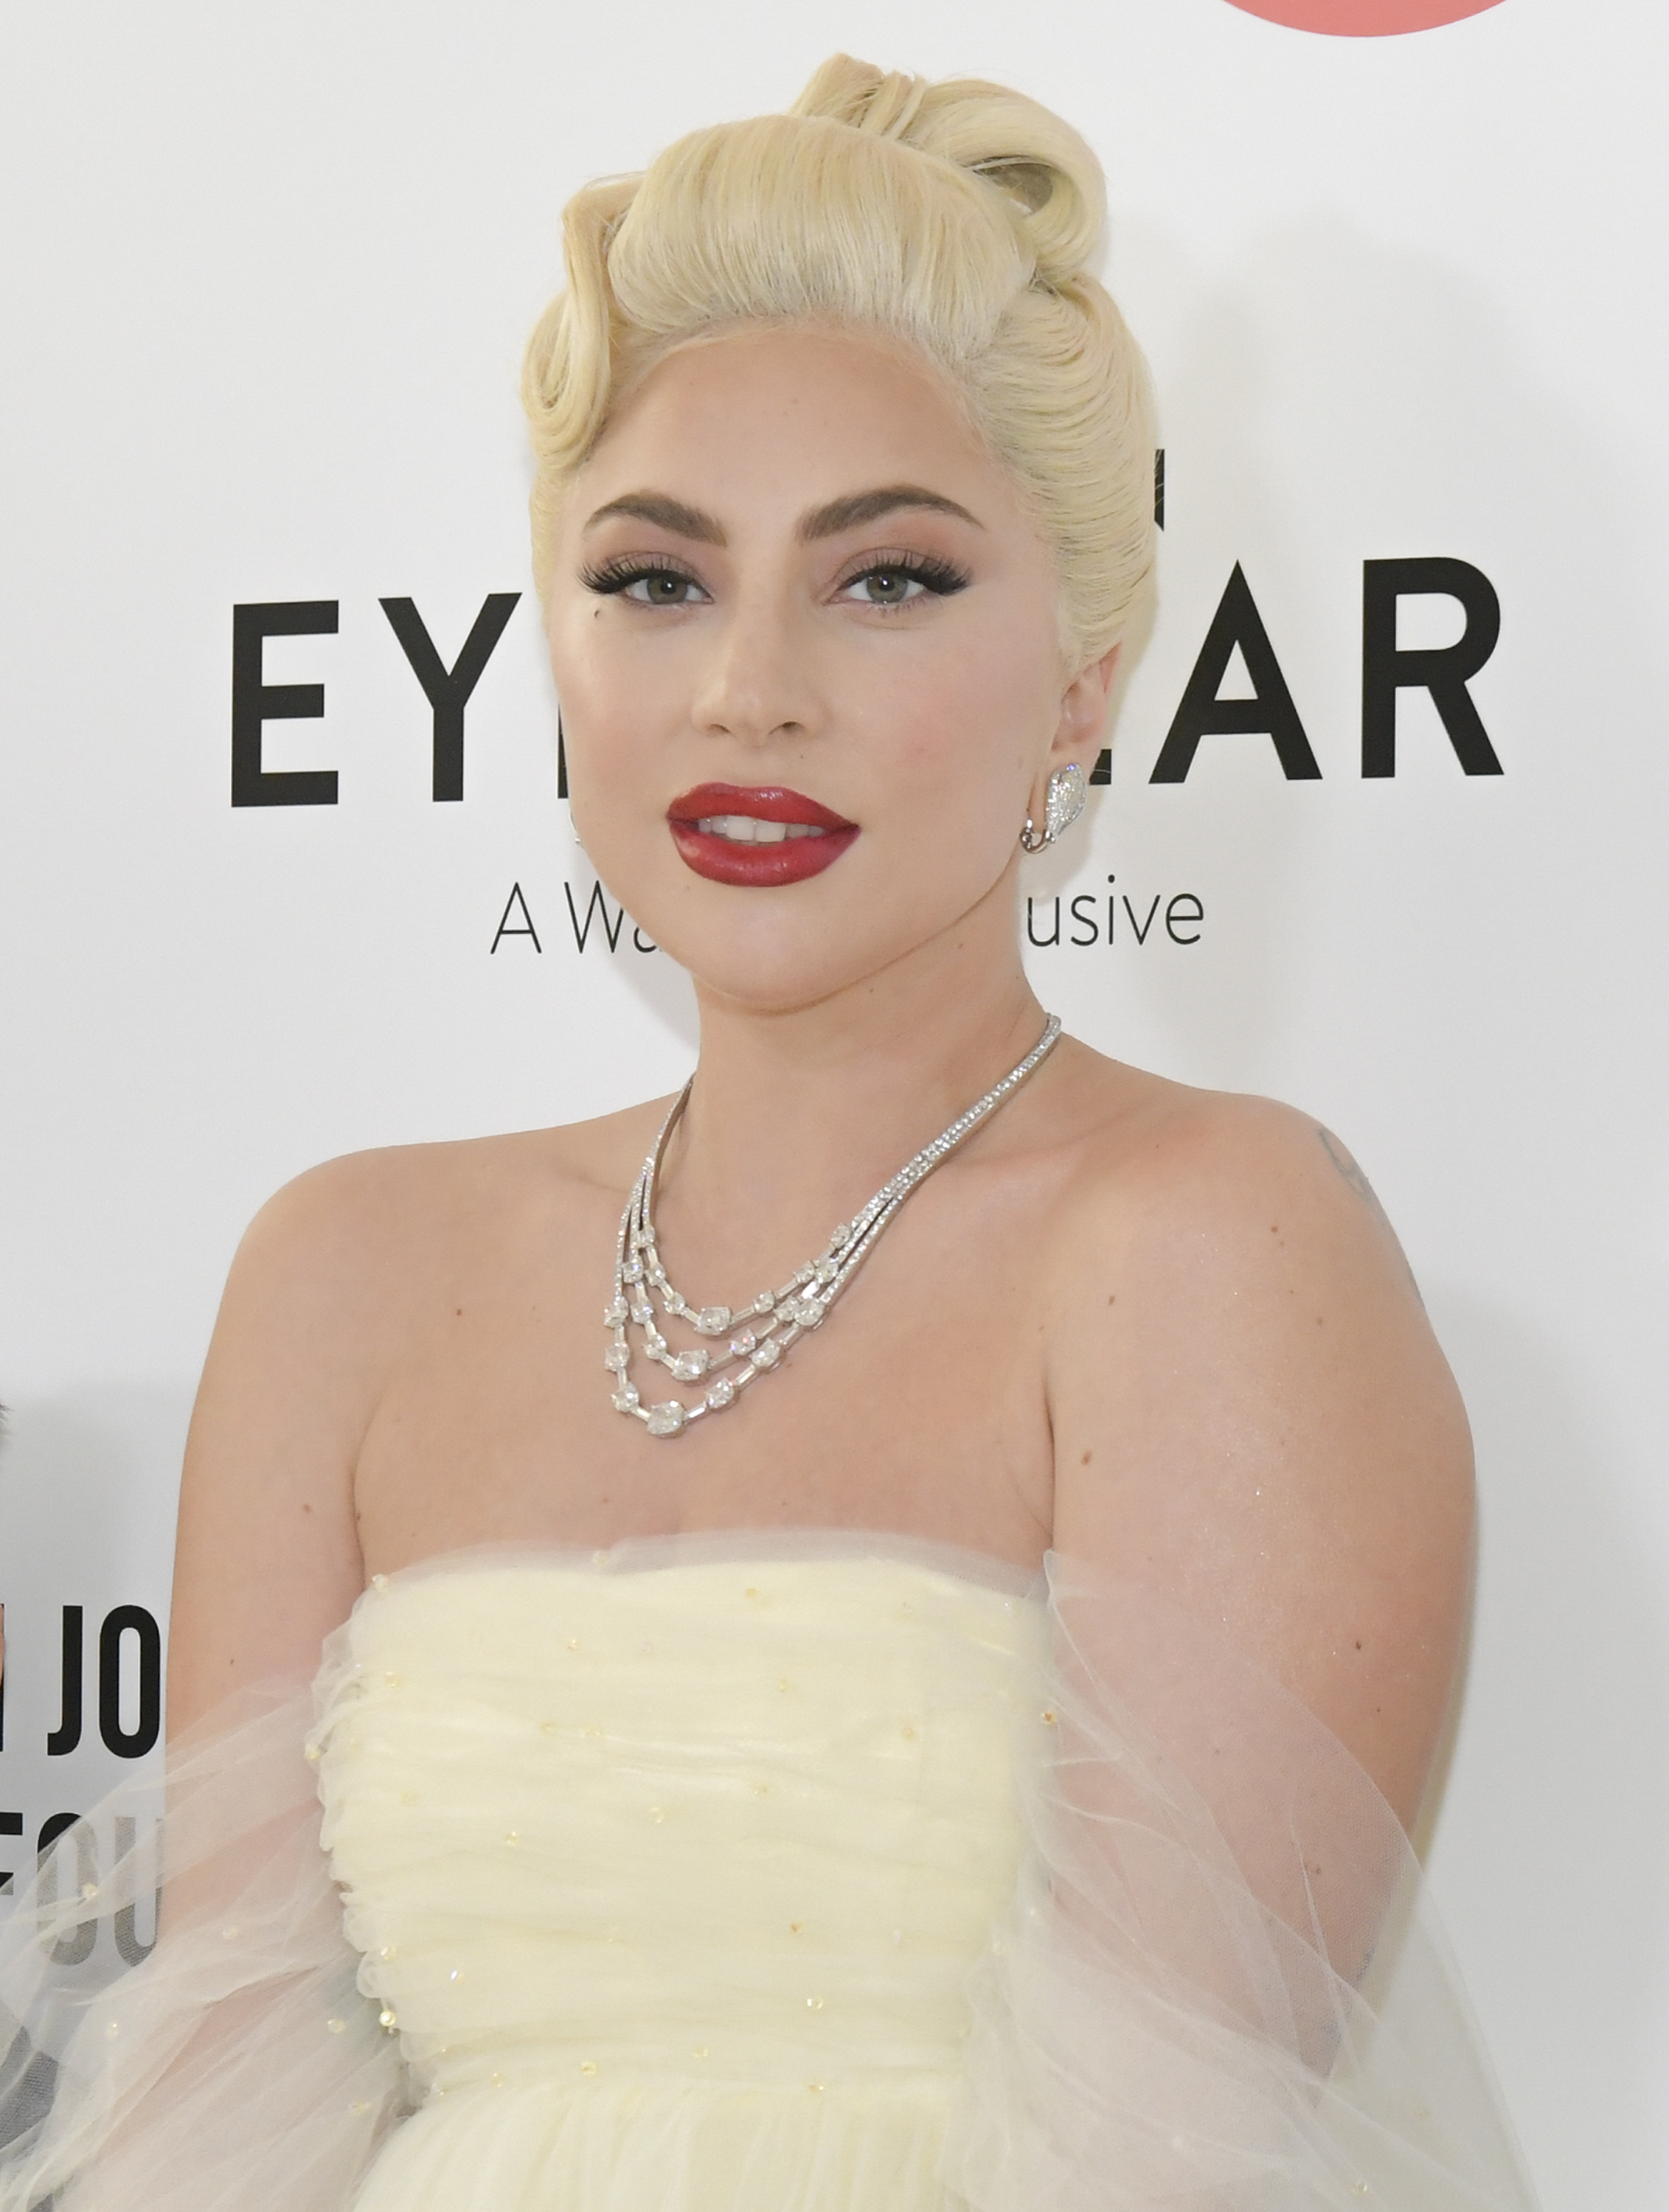 Lady Gaga on the red carpet, wearing an elegant strapless gown and a layered diamond necklace, with retro-styled hair and bold makeup